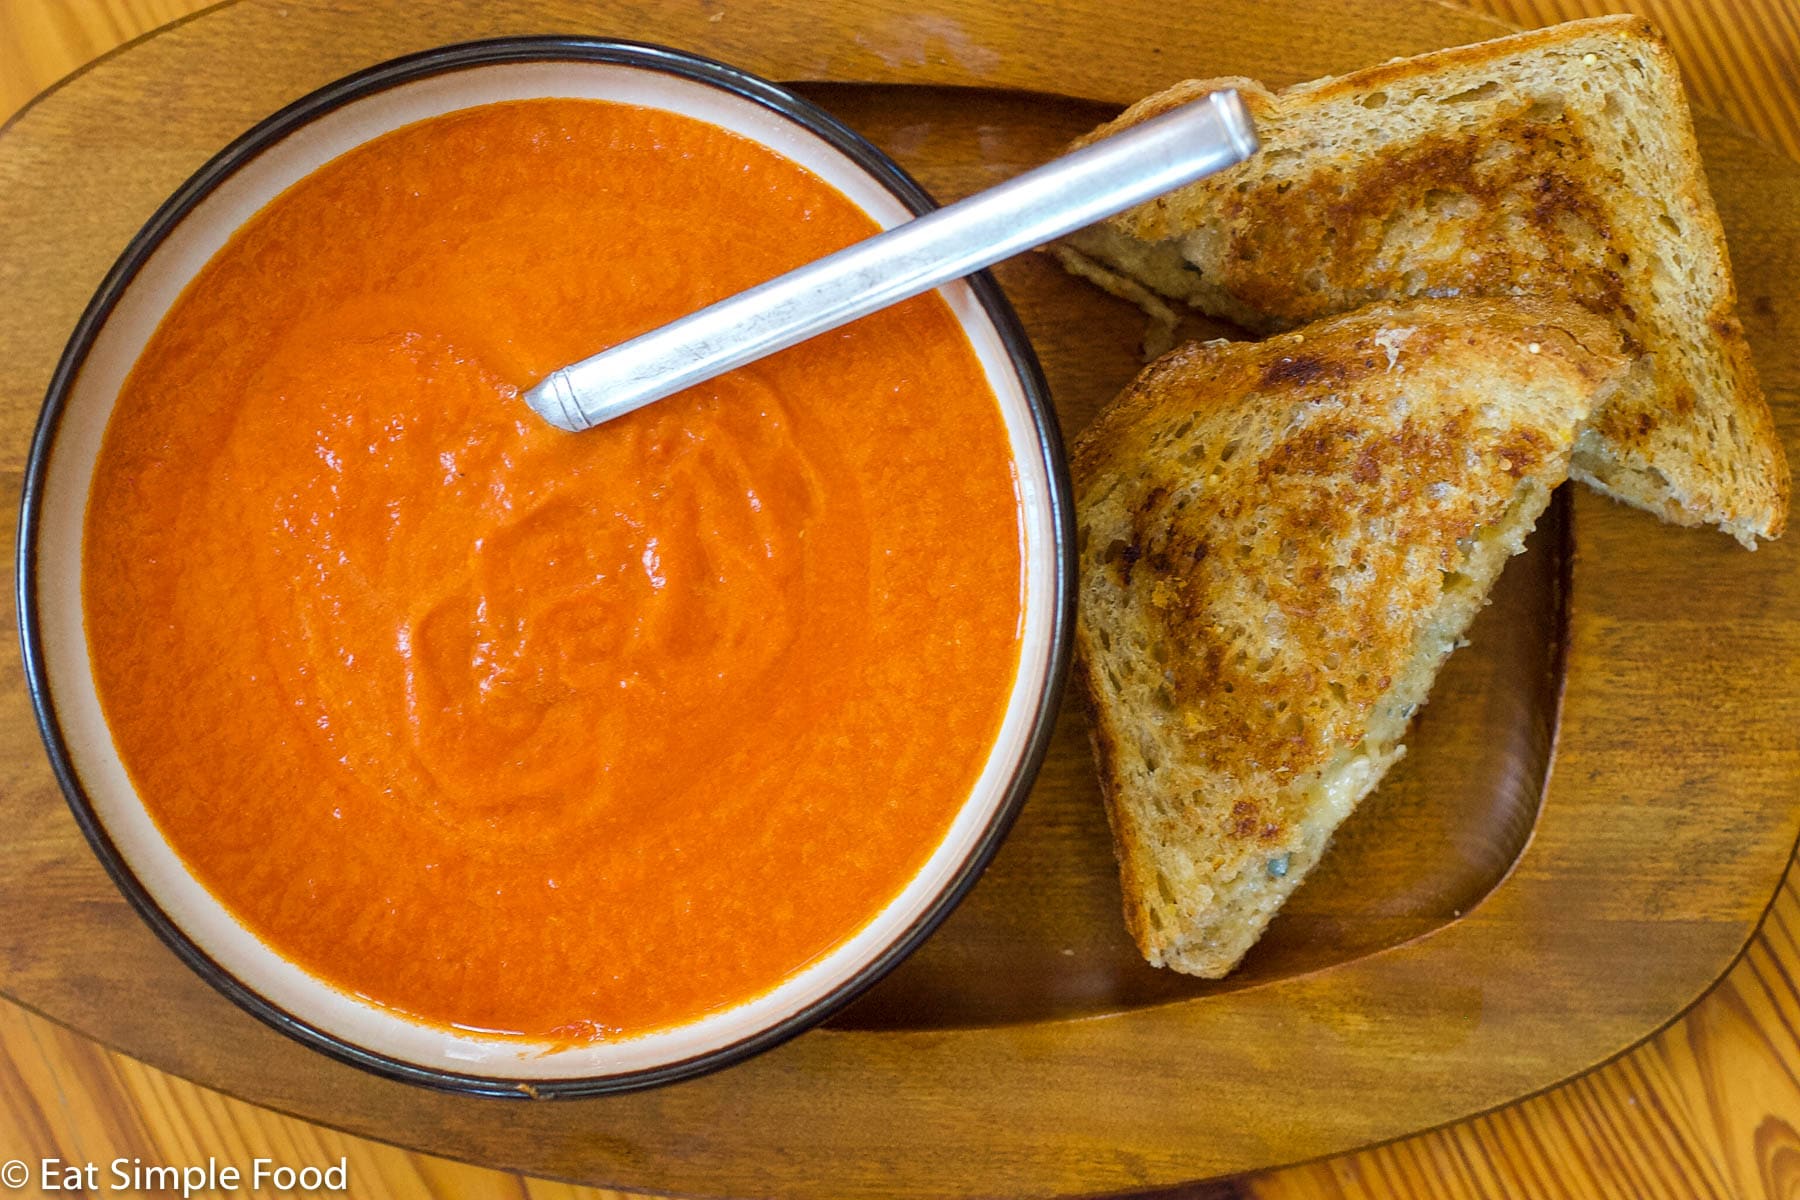 White bowl with black rim of red tomato bisque soup on a wood rectangle plate. Grilled cheese sandwich cut in half diagonally on the side. Top view.